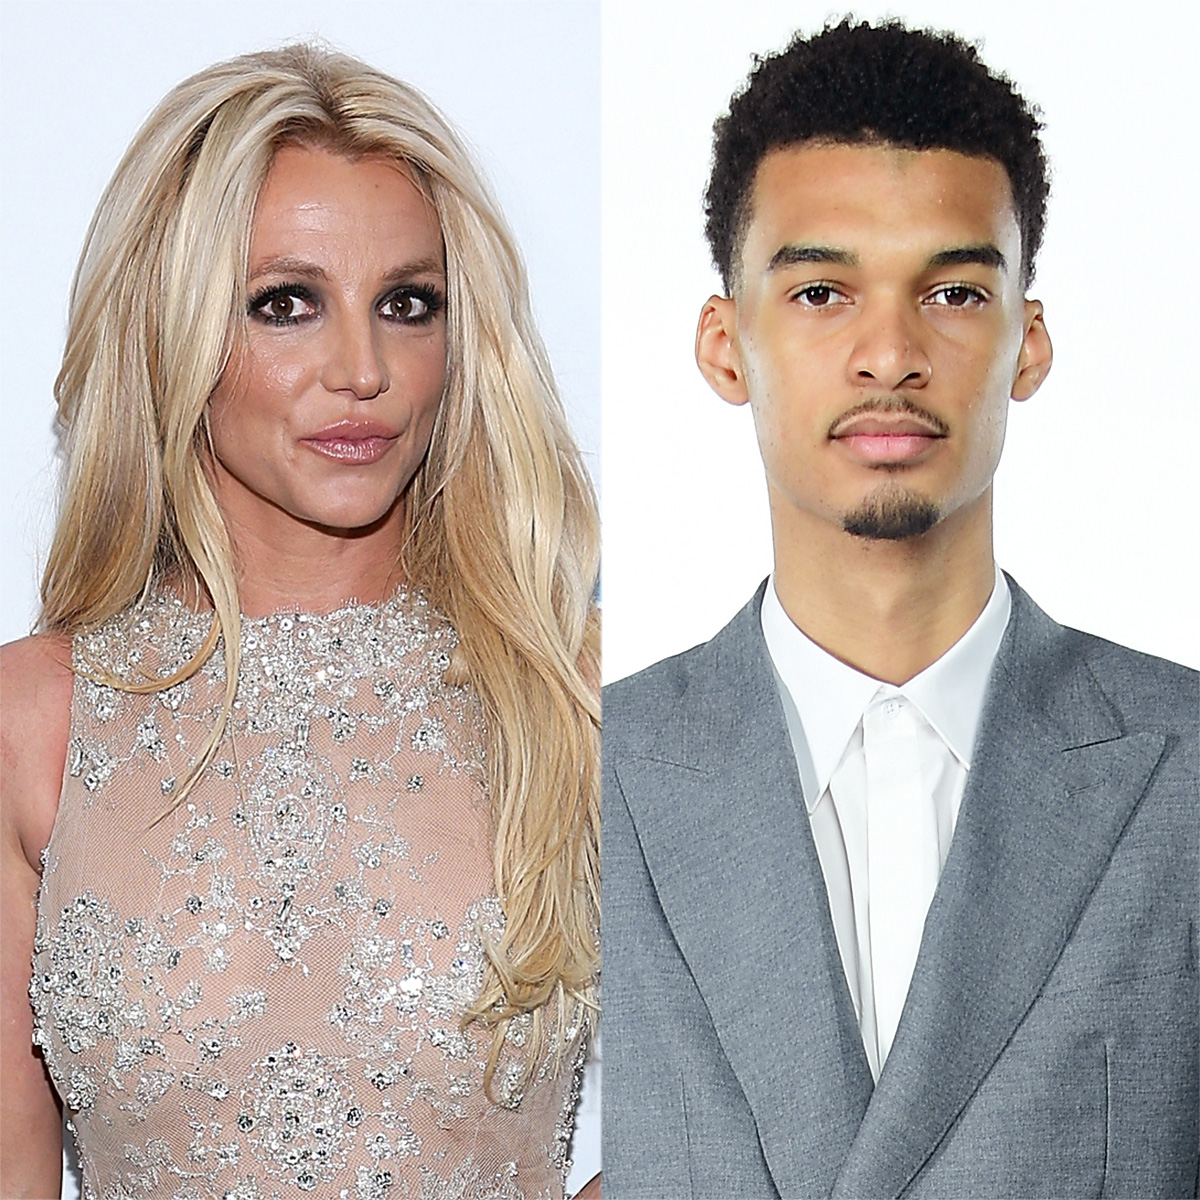 Britney Spears Says She Wasn’t Treated Equal Amid Security Attack